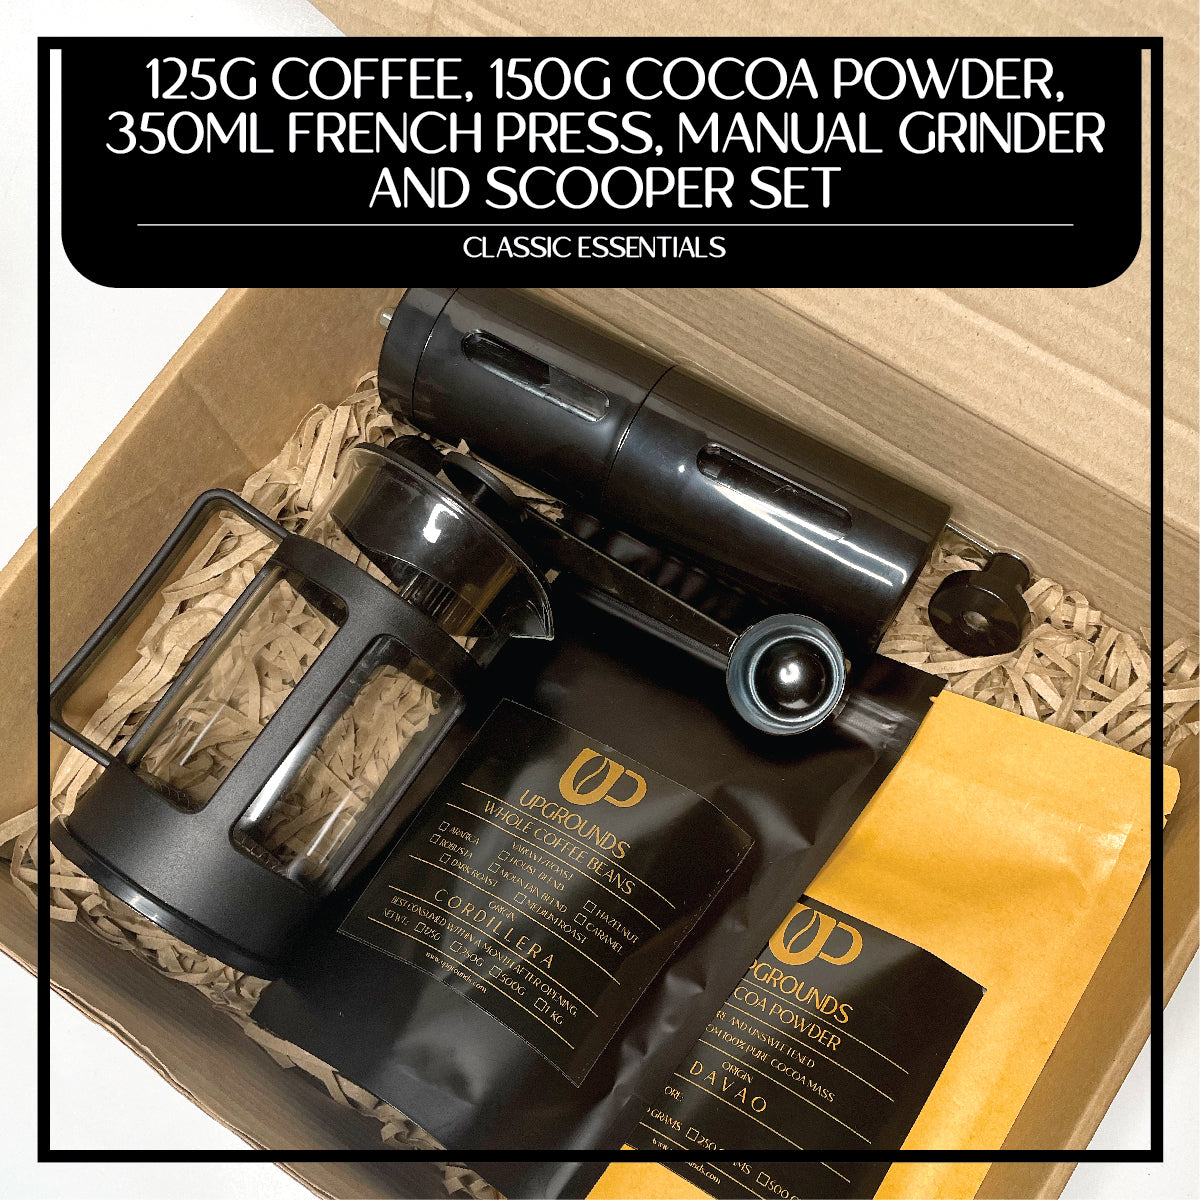 125g Coffee, 150 Cocoa Powder, 350ml French Press, Manual Grinder and Scooper Set | Upgrounds